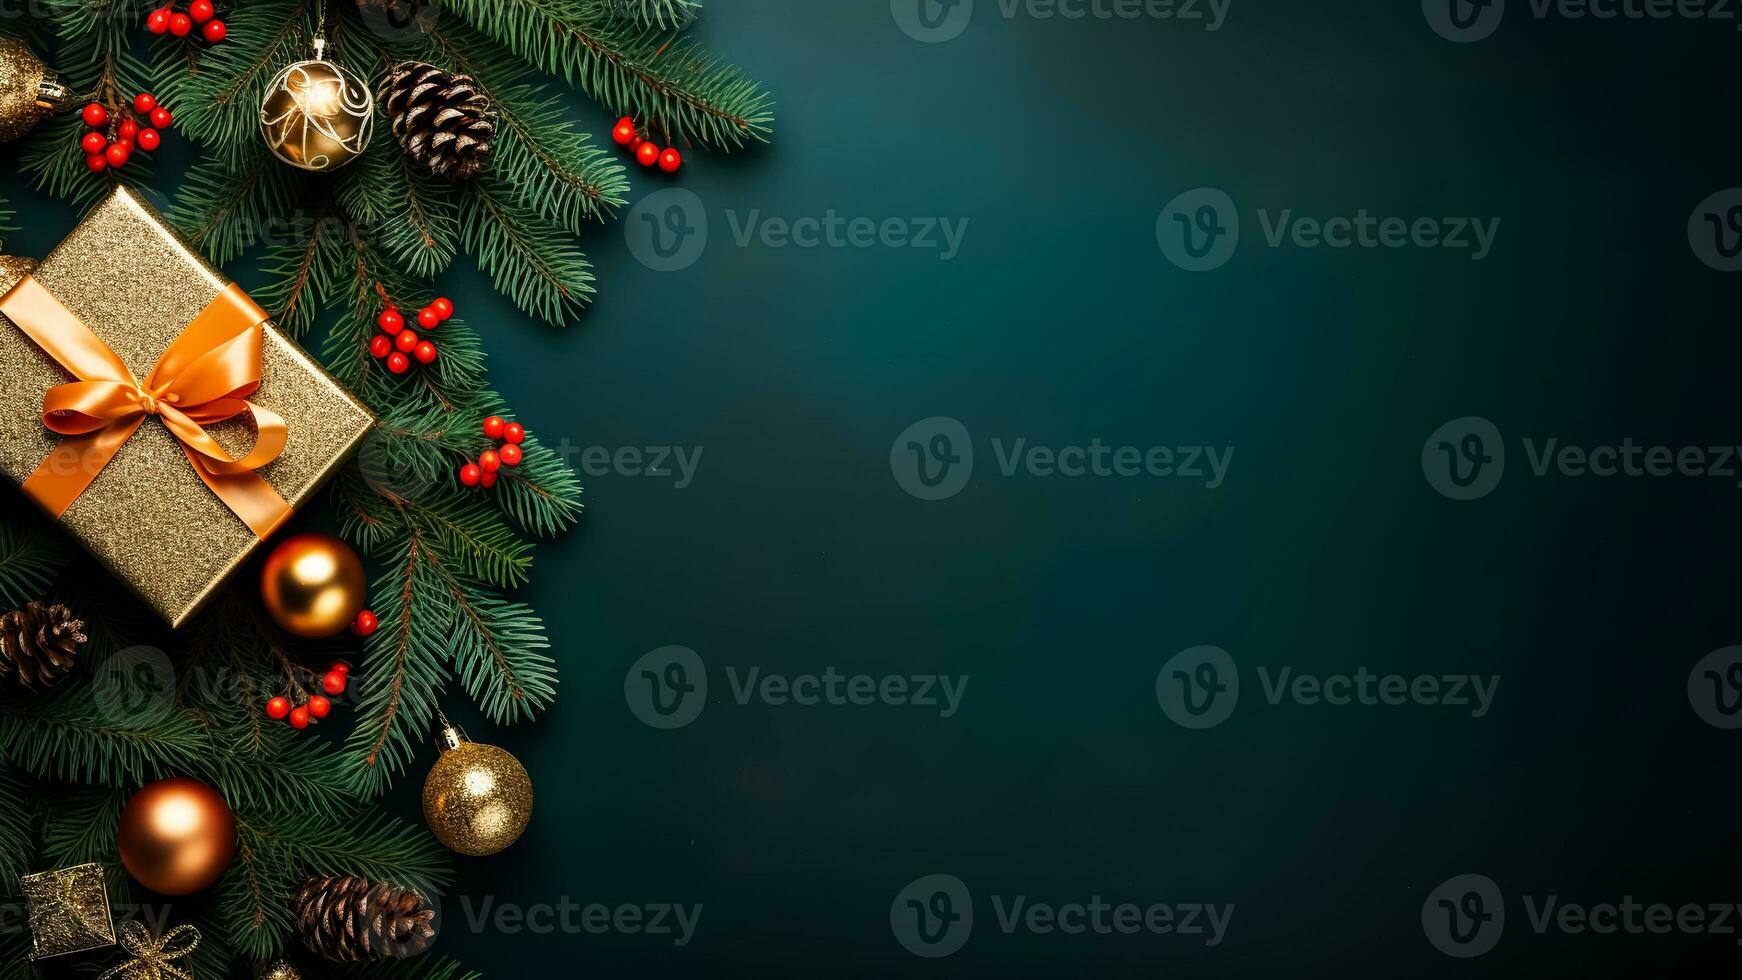 AI generated Christmas border design on dark green background. Spruce, fir branches, golden baubles and gift box, red berries, pine cones. Merry Xmas and Happy New Year composition, frame decorative photo